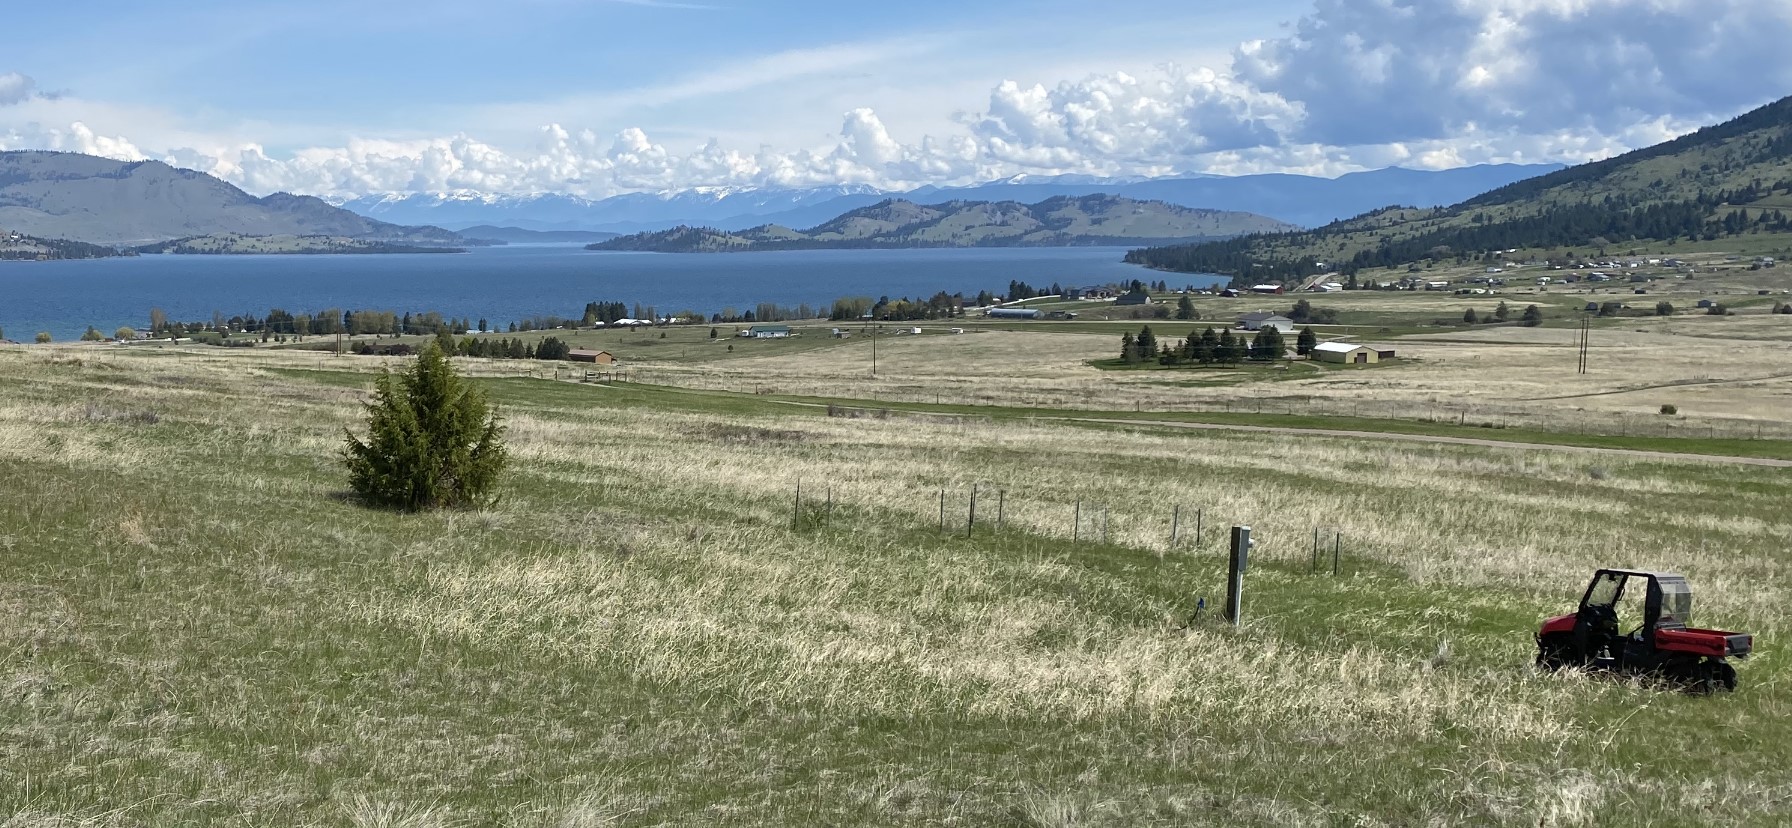 Stunning views overlooking Flathead Lake with Wild Horse Island in the forefront and Swan & Mission Mountain ranges in the background.  Five minutes to Big Arm Marina and State Park boat launch.  Ability for future option to subdivide into two 5-acre tracts for two incredible building sites.  Bordering State Lands, corners marked, approved for septic with county DEQ, power to property and fully fenced.  Mild winters and easy access with option to adjust current owners access road if desired. Located approx. 20 minutes to Polson, 45 minutes to Kalispell and about an hour to Glacier International Airport. For more information, contact Tracy Rossi at 406-763-6808 or your real estate professional.